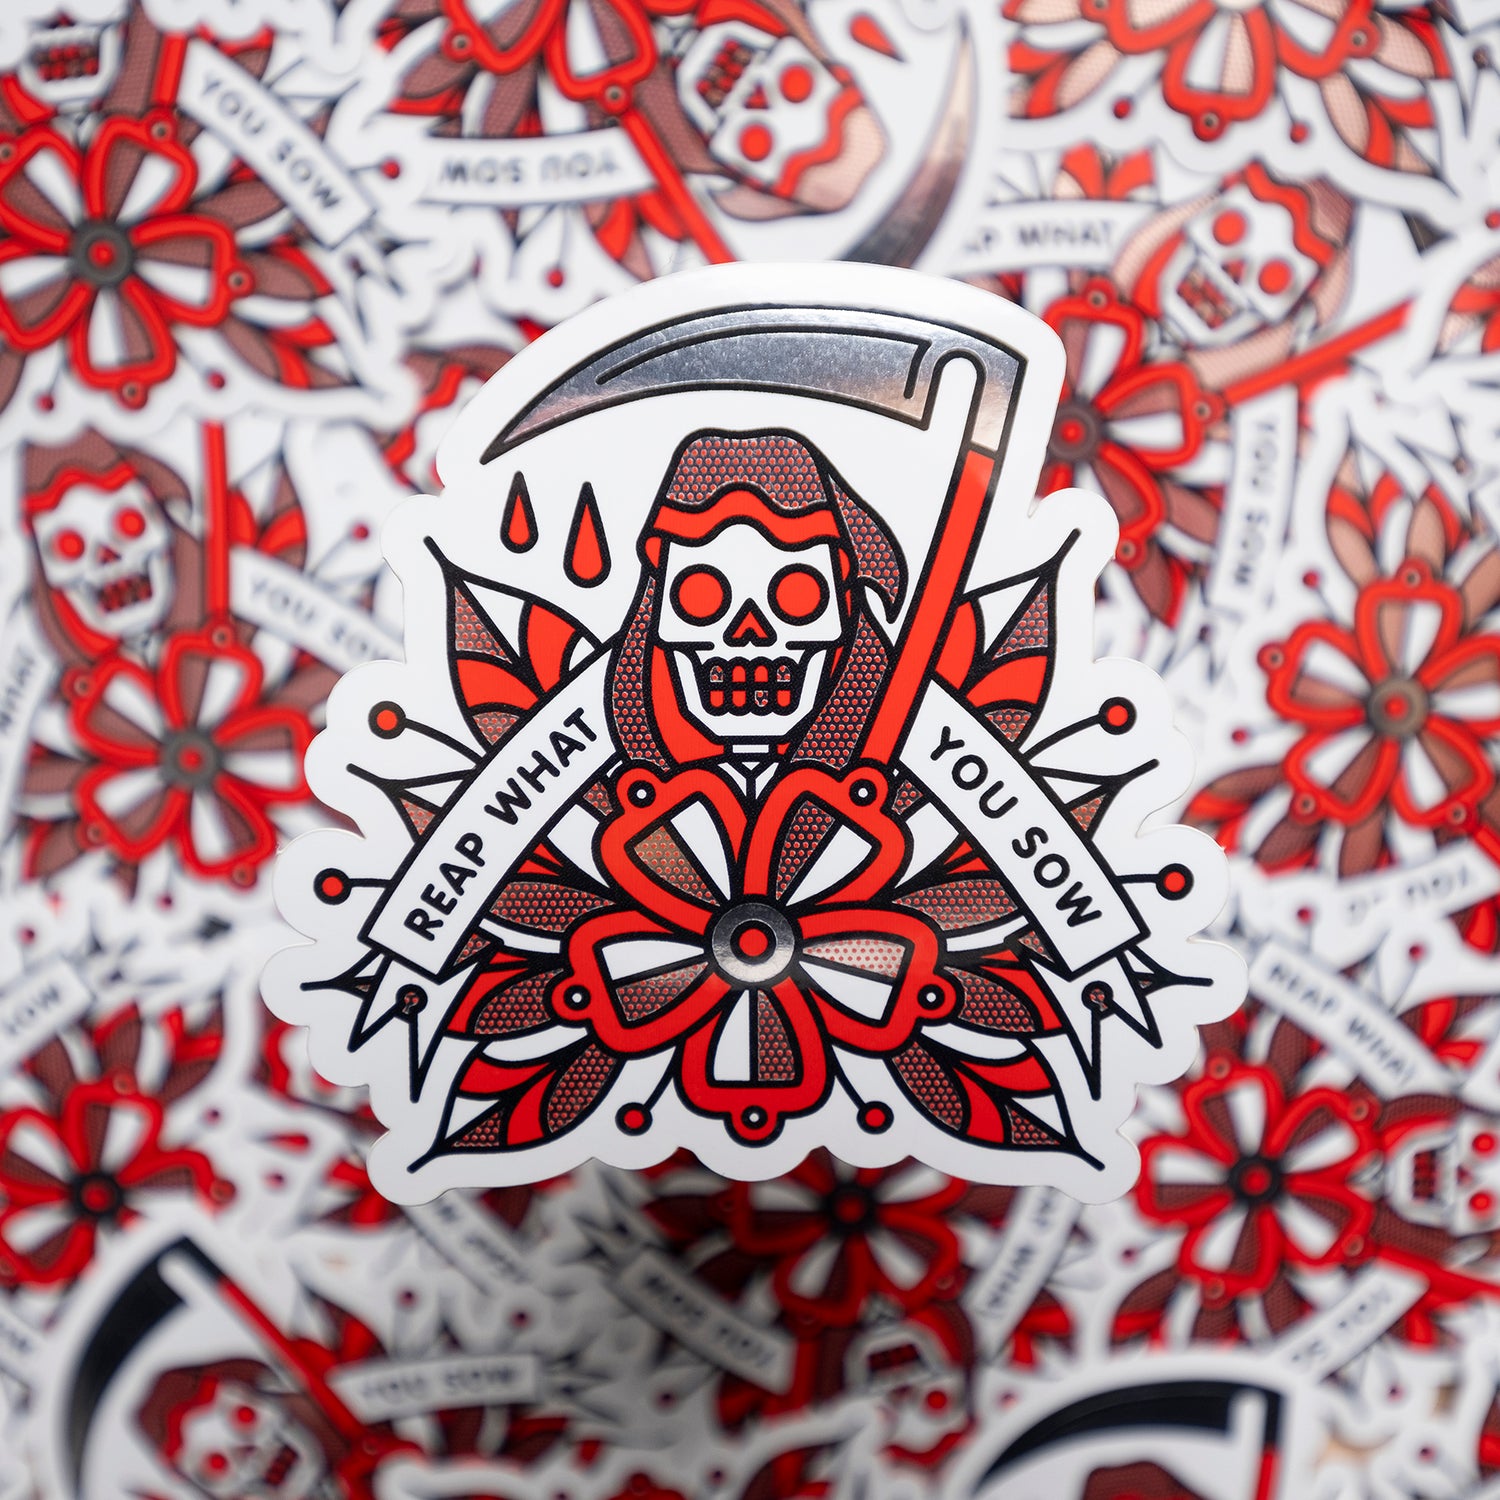 A 3.3x3.2" metallic vinyl art sticker of a grim reaper holding a scythe behind a large flower. A banner reads: Reap what you sow. Drawn in a flash tattoo and pop art fusion style in a red, white and black color palette by the artist, Red Halftone.